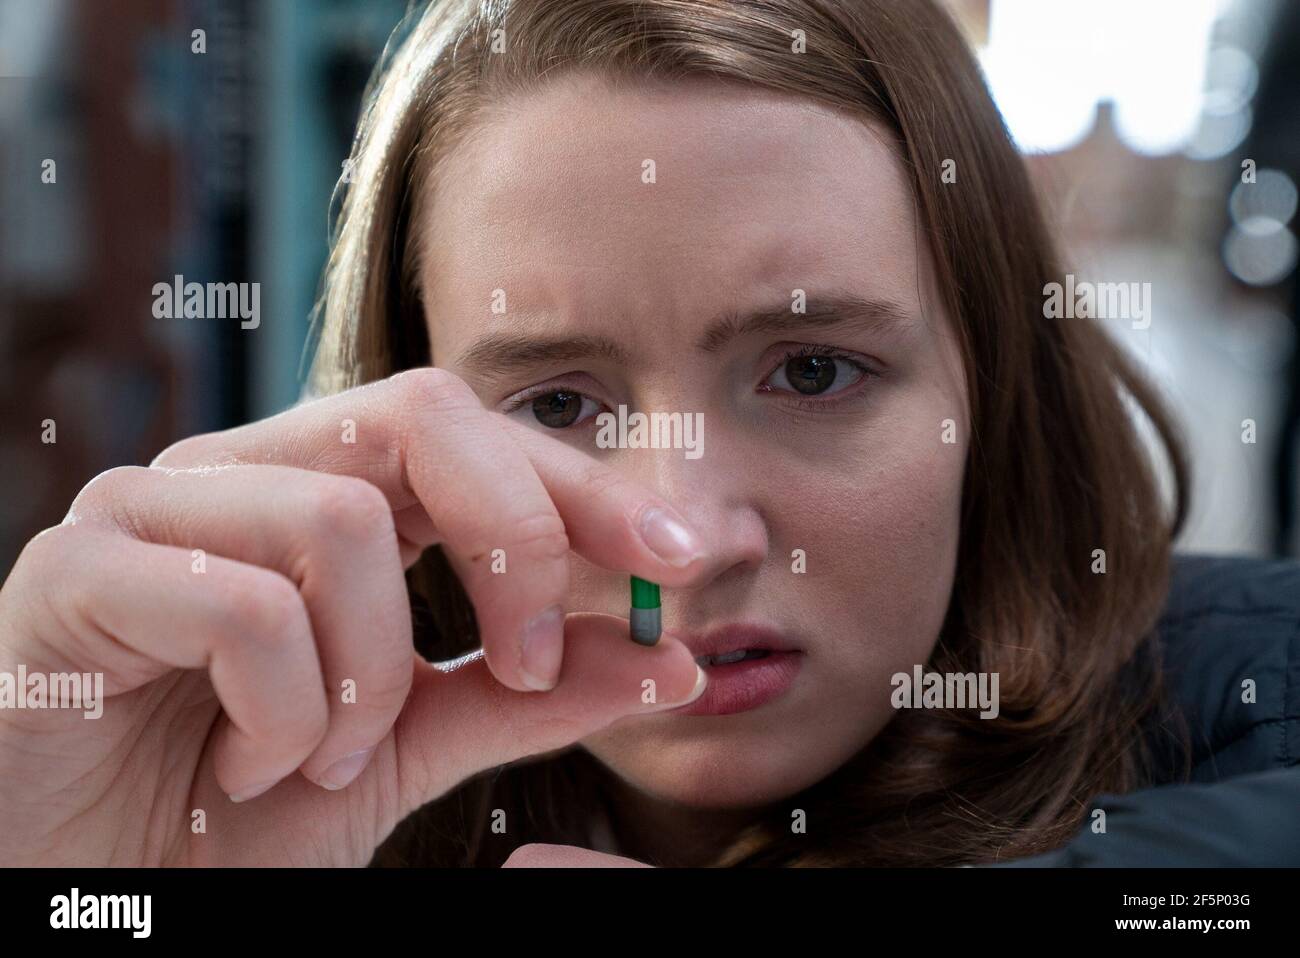 KIERA ALLEN in RUN (2020), directed by ANEESH CHAGANTY. Copyright: Editorial use only. No merchandising or book covers. This is a publicly distributed handout. Access rights only, no license of copyright provided. Only to be reproduced in conjunction with promotion of this film. Credit: LIONSGATE / Album Stock Photo